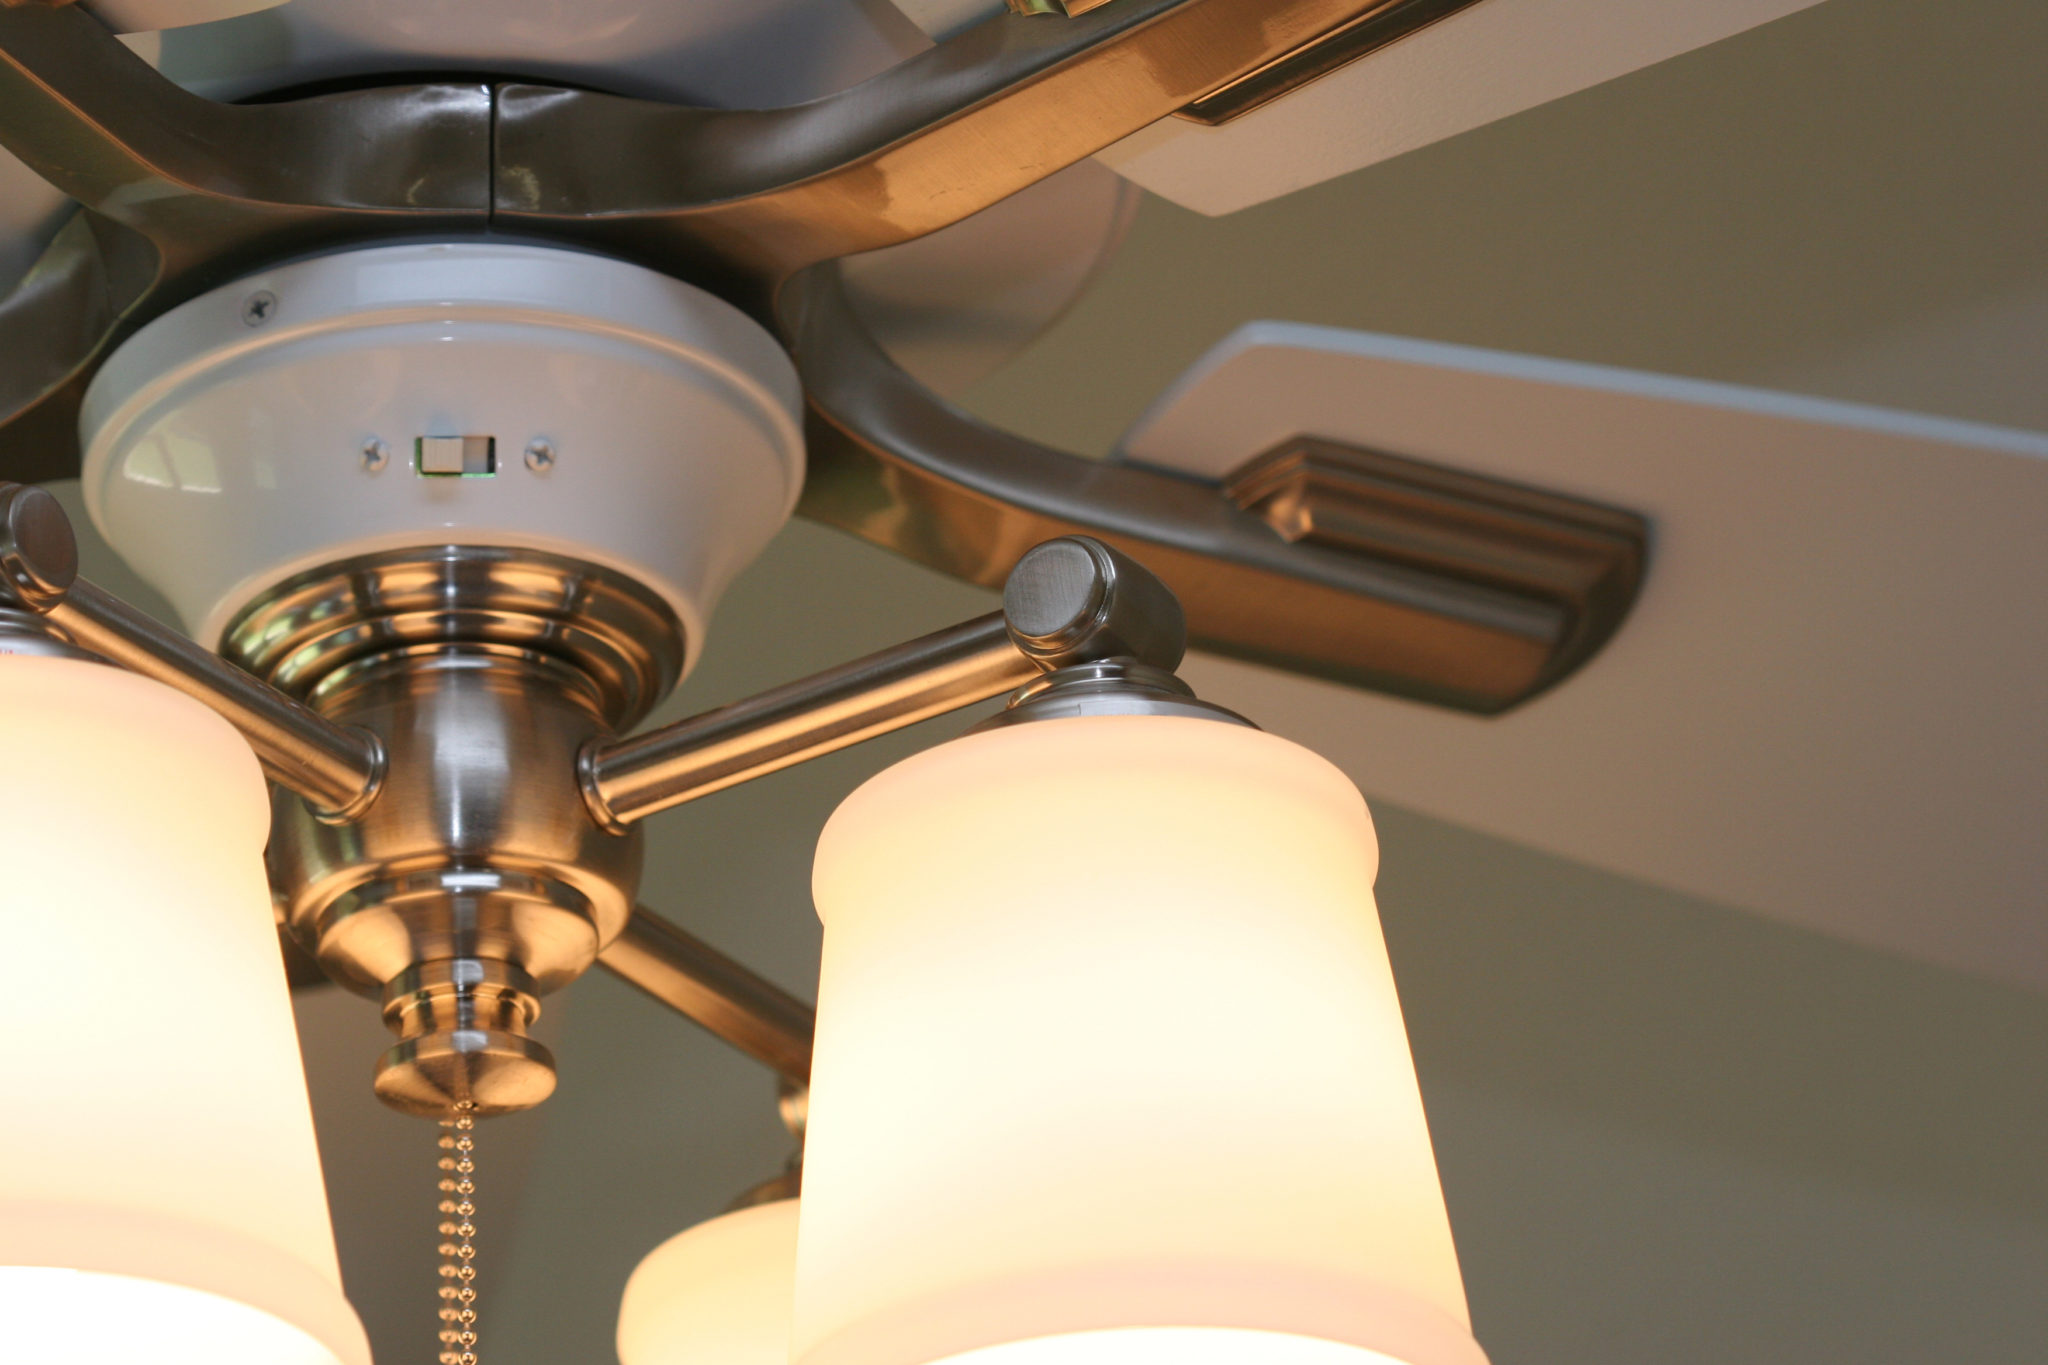 Light Fixture With A Ceiling Fan